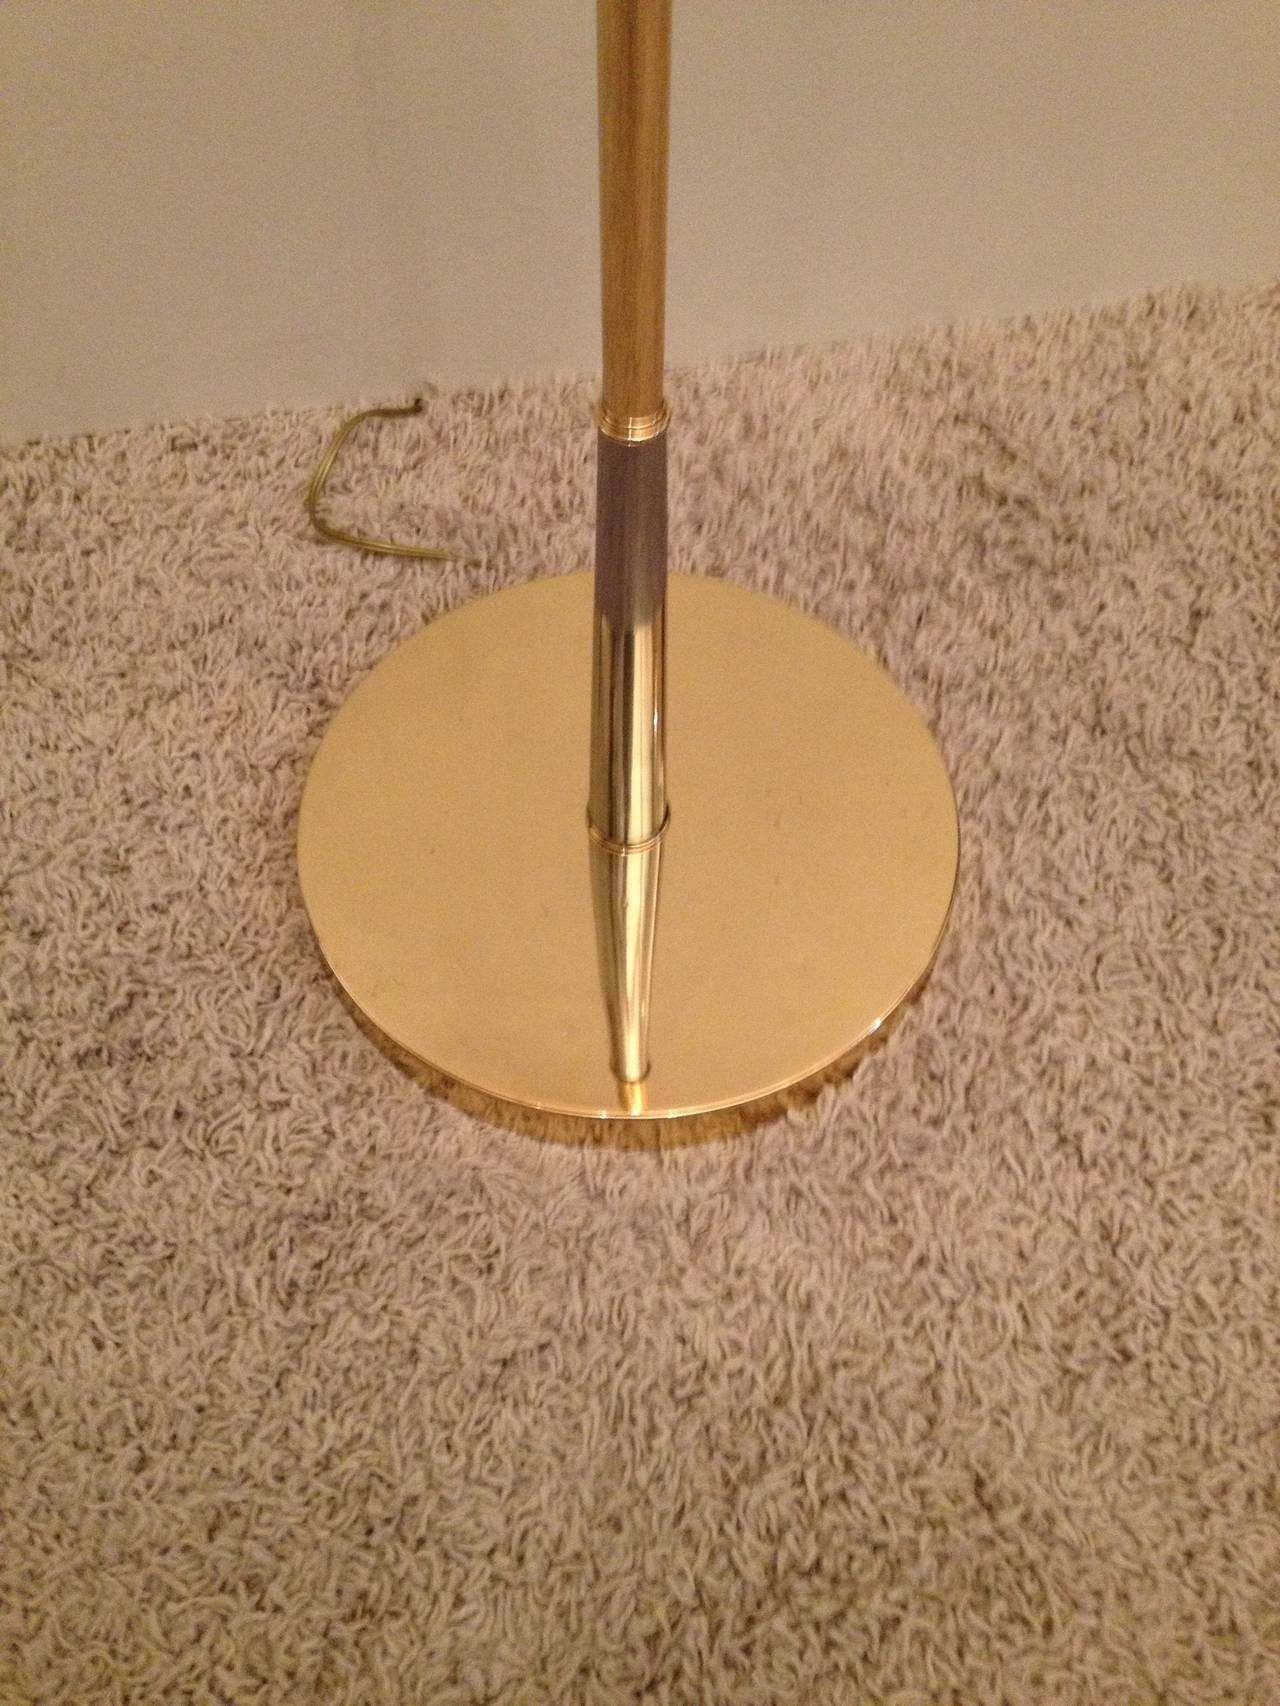 Stilnovo Style Solid Brass Pierced Shade 1950s Standing Lamp For Sale 3